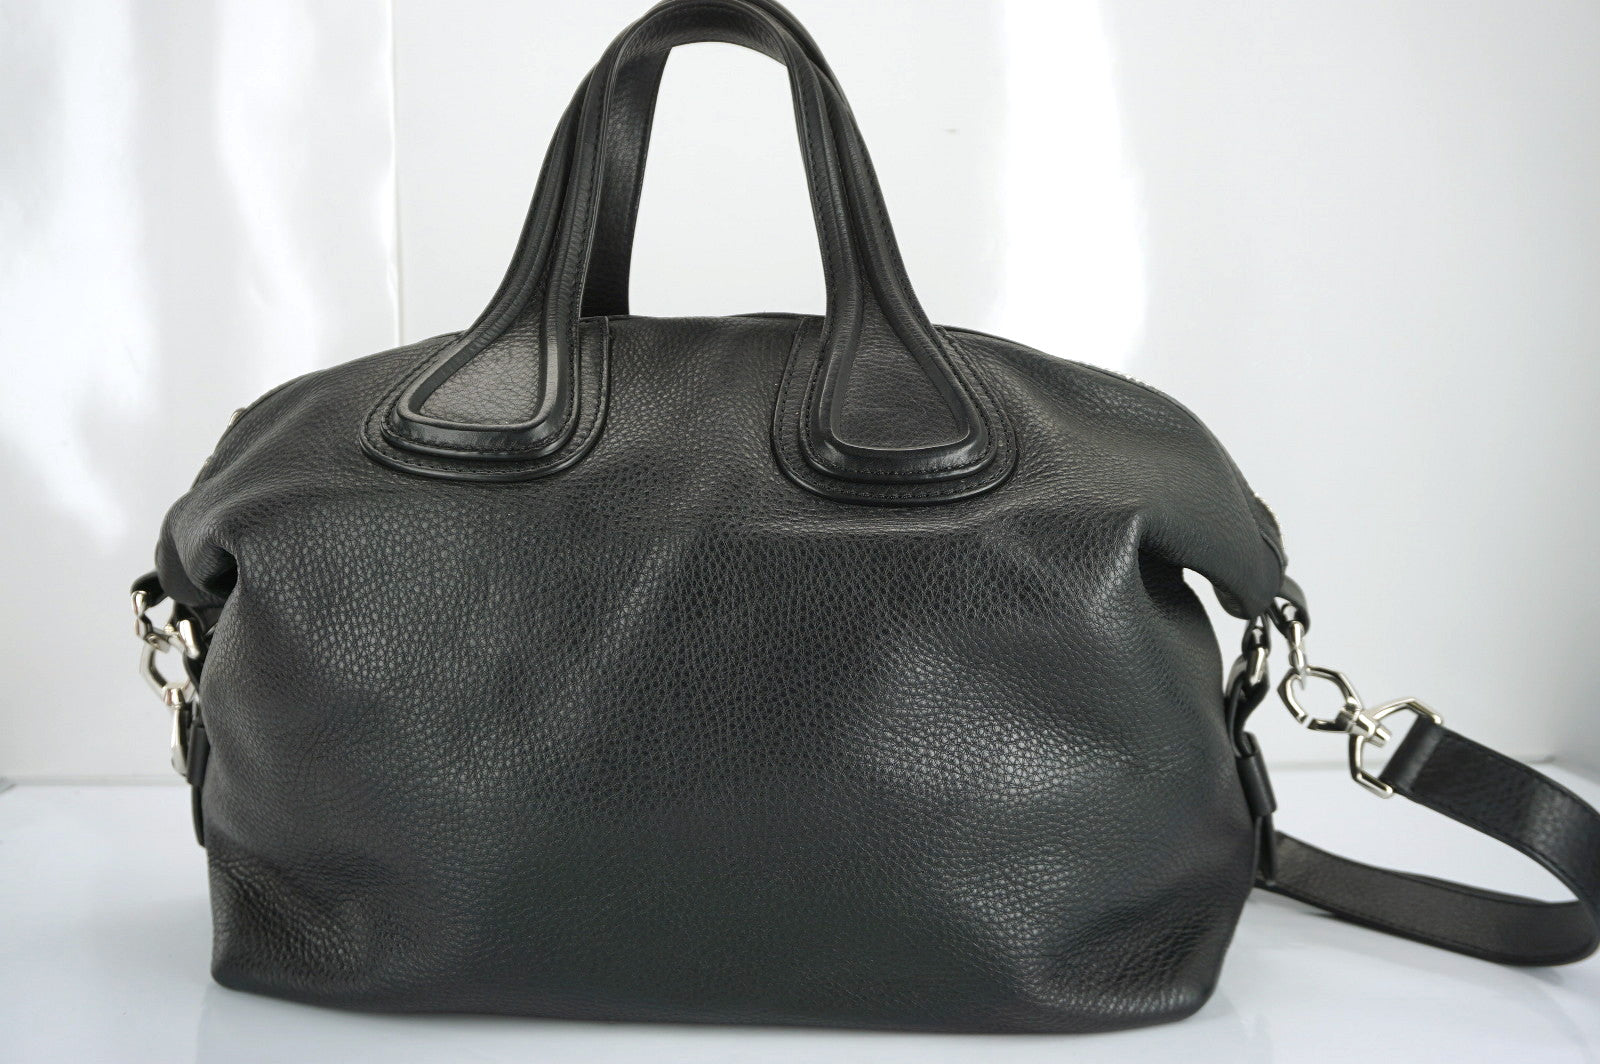 Givenchy Black Leather Nightengale Medium Waxy Satchel Shoulder Bag $2450 New